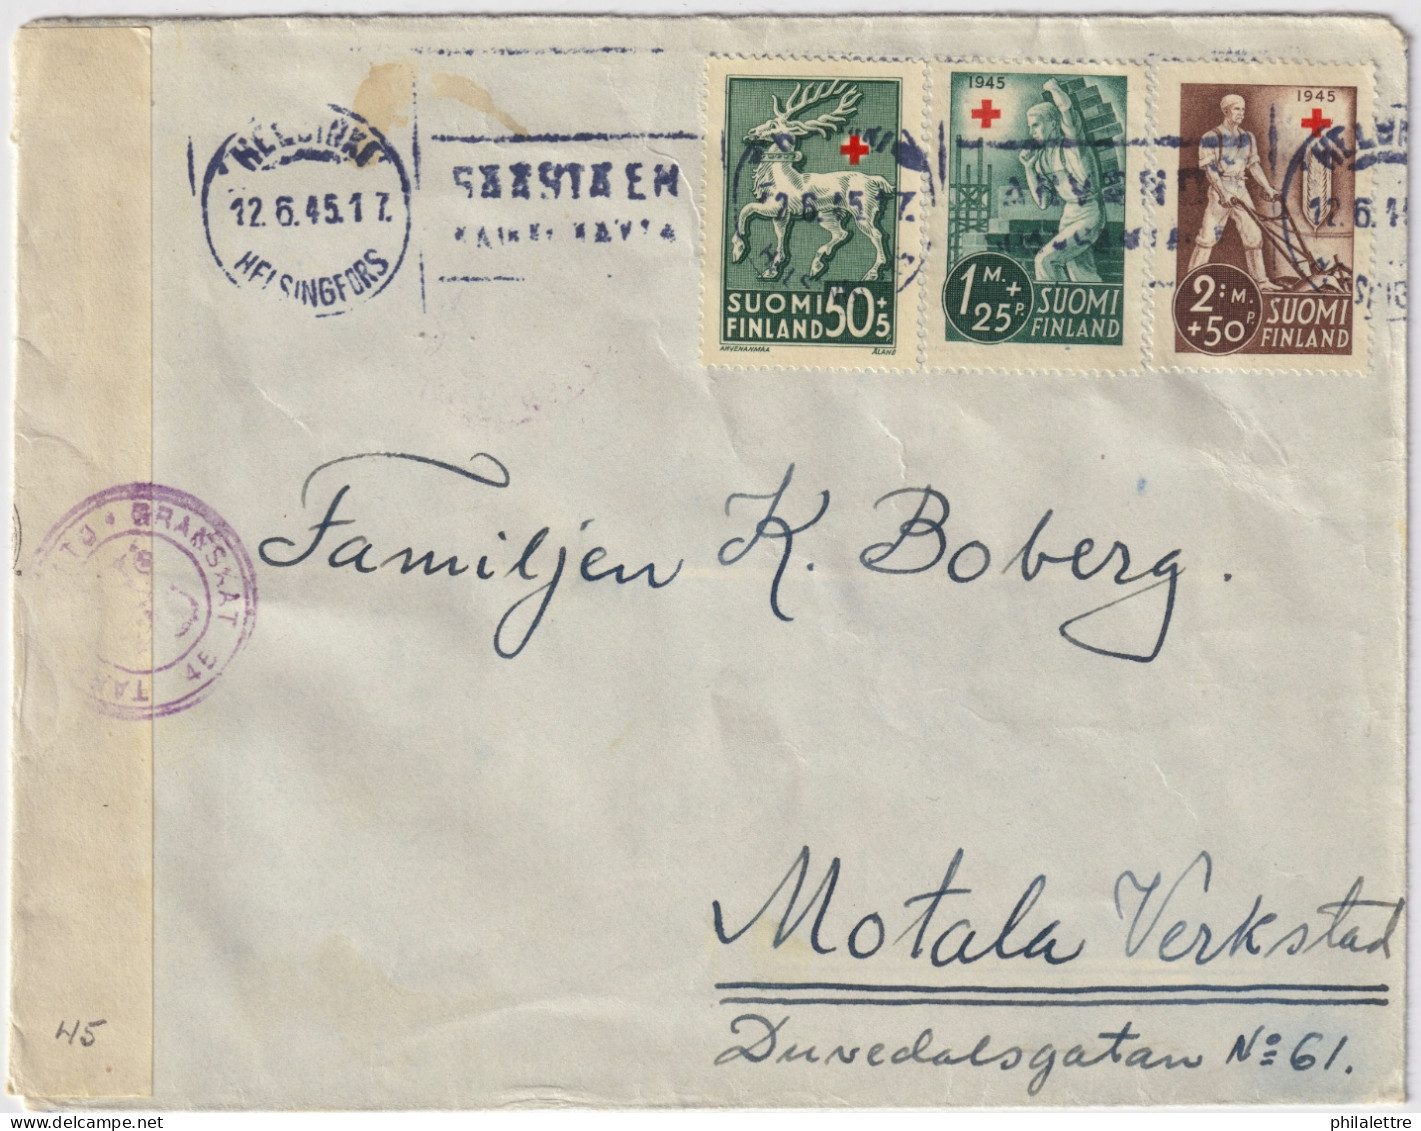 FINLAND - 1945 - Facit F258, F295 & F296 Red Cross (1942 & 45 Issues) On Censored Cover From HELSINKI To MOTALA, Sweden - Cartas & Documentos